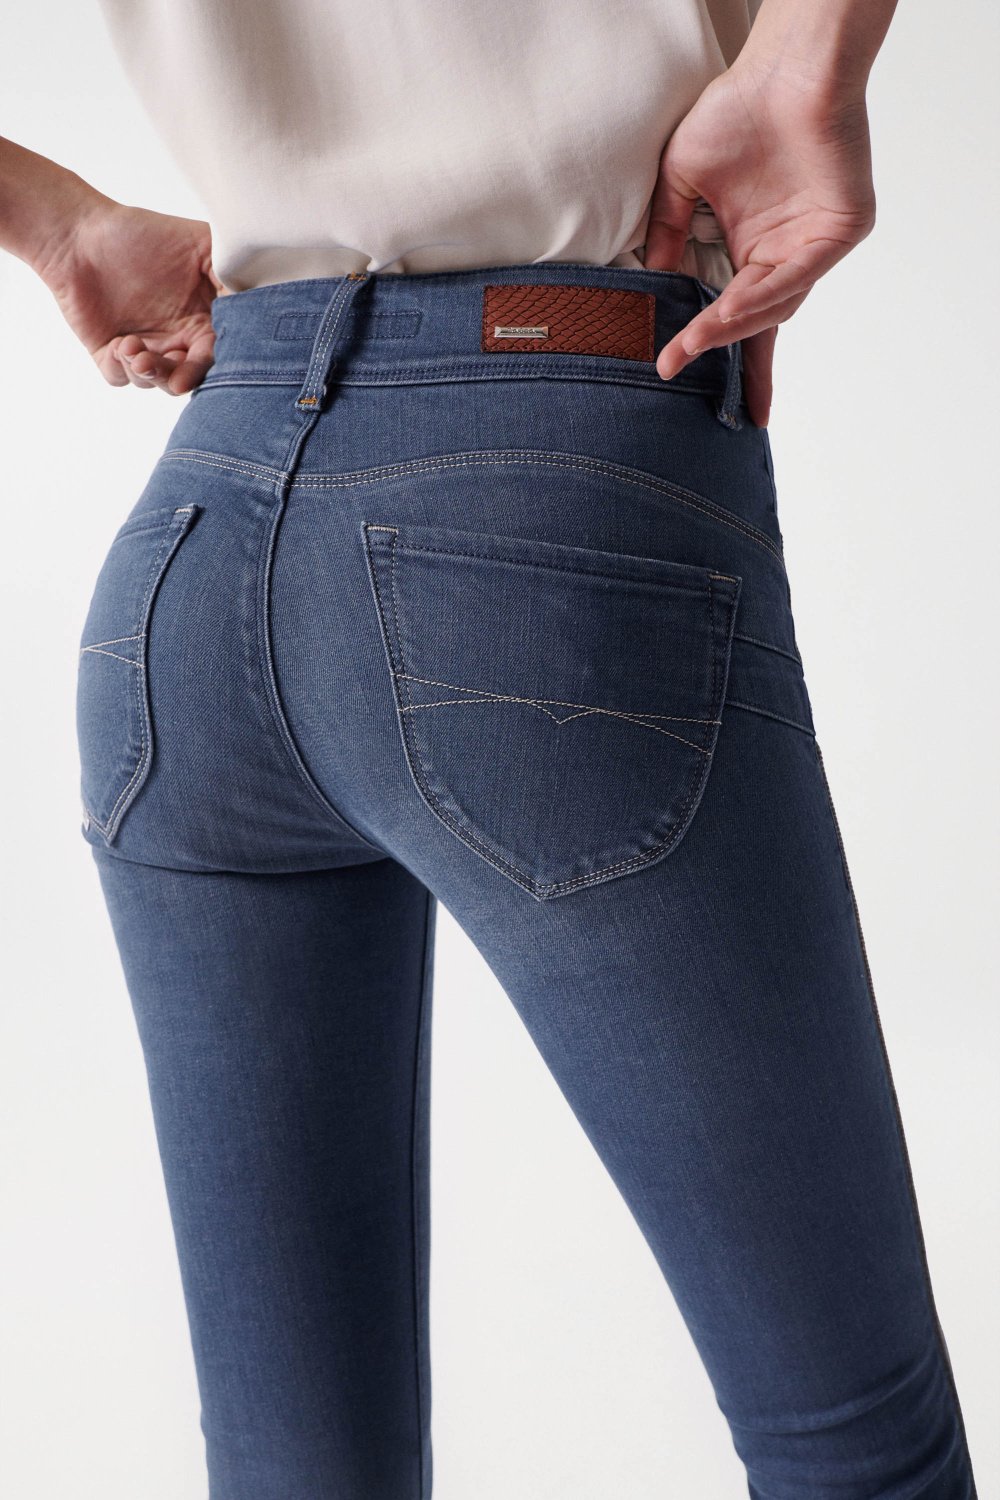 SECRET PUSH IN JEANS WITH STITCHING DETAIL ON THE LEG - Salsa